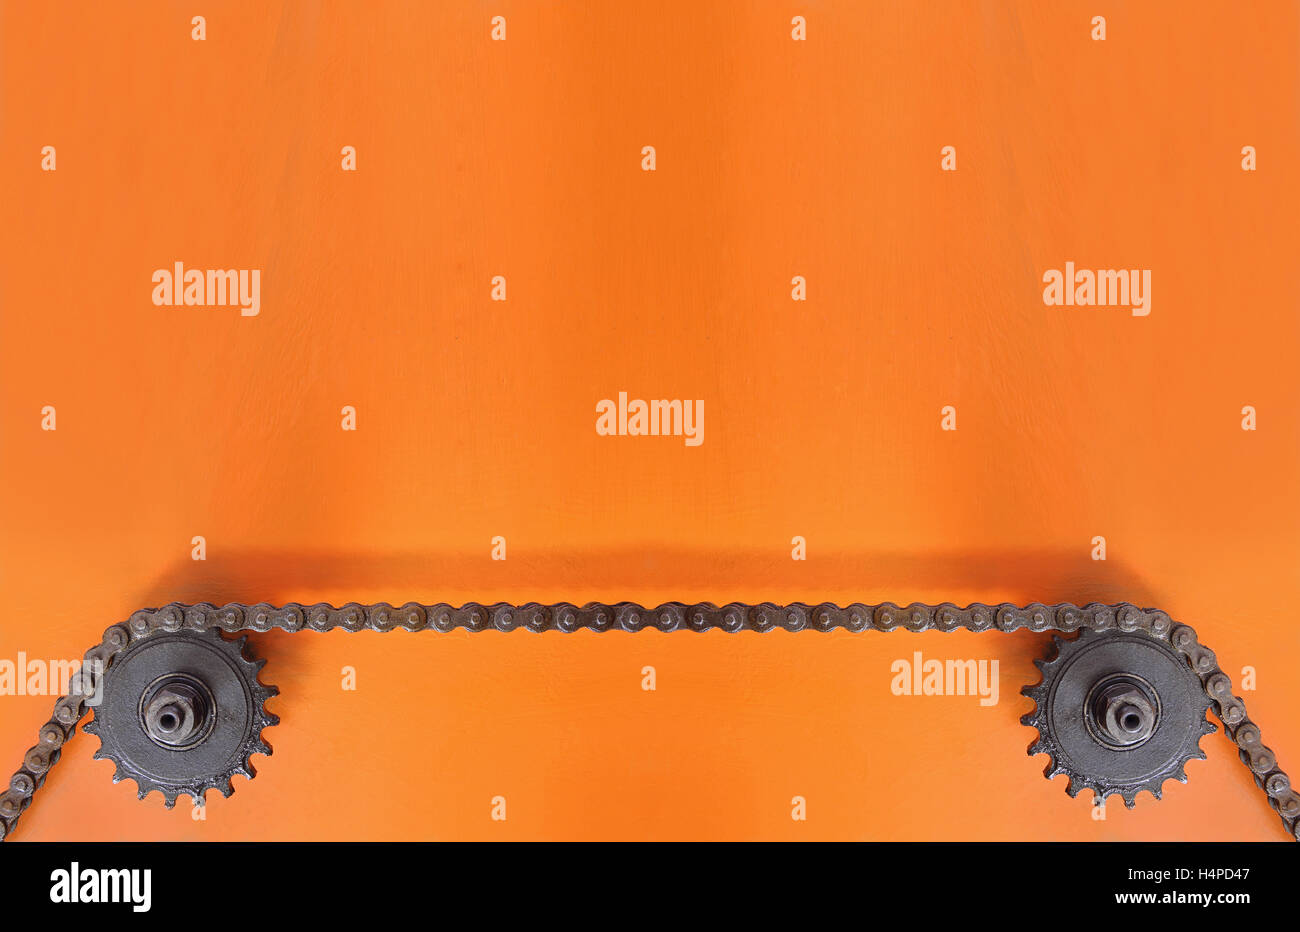 Black metal cogwheels and chain on orange background with empty space. Stock Photo